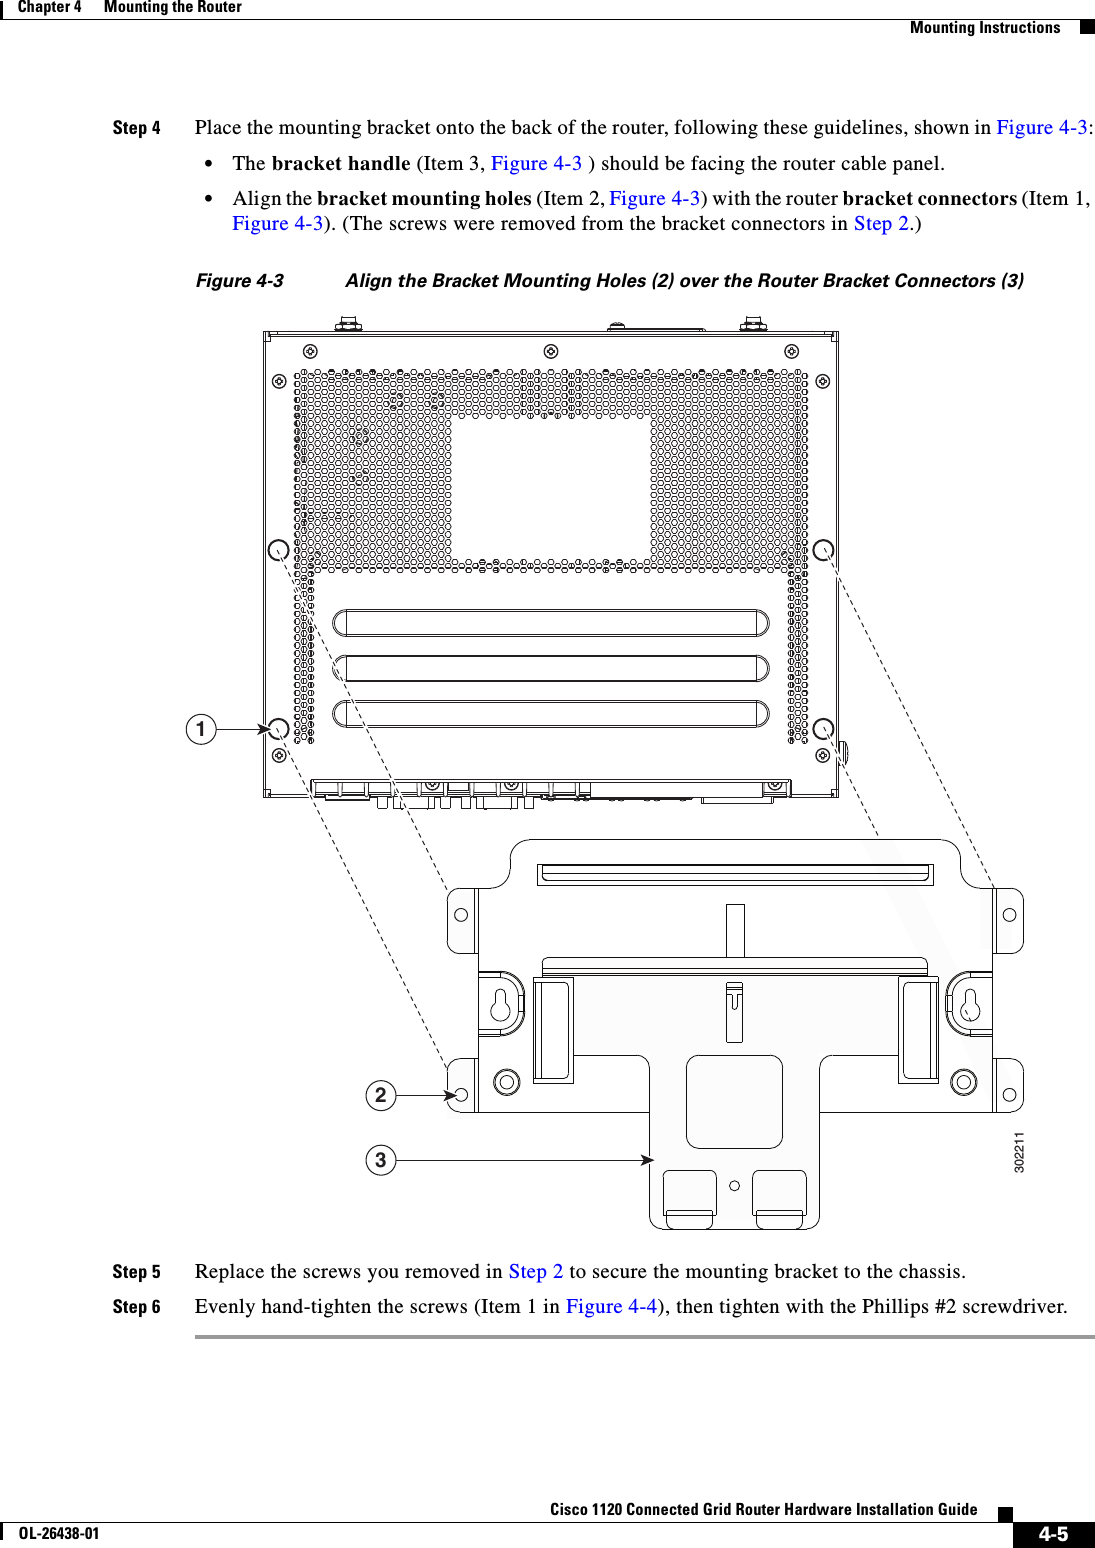  4-5Cisco 1120 Connected Grid Router Hardware Installation GuideOL-26438-01Chapter 4      Mounting the Router  Mounting InstructionsStep 4 Place the mounting bracket onto the back of the router, following these guidelines, shown in Figure 4-3:•The bracket handle (Item 3, Figure 4-3 ) should be facing the router cable panel.•Align the bracket mounting holes (Item 2, Figure 4-3) with the router bracket connectors (Item 1, Figure 4-3). (The screws were removed from the bracket connectors in Step 2.)Figure 4-3 Align the Bracket Mounting Holes (2) over the Router Bracket Connectors (3)Step 5 Replace the screws you removed in Step 2 to secure the mounting bracket to the chassis.Step 6 Evenly hand-tighten the screws (Item 1 in Figure 4-4), then tighten with the Phillips #2 screwdriver.302211123